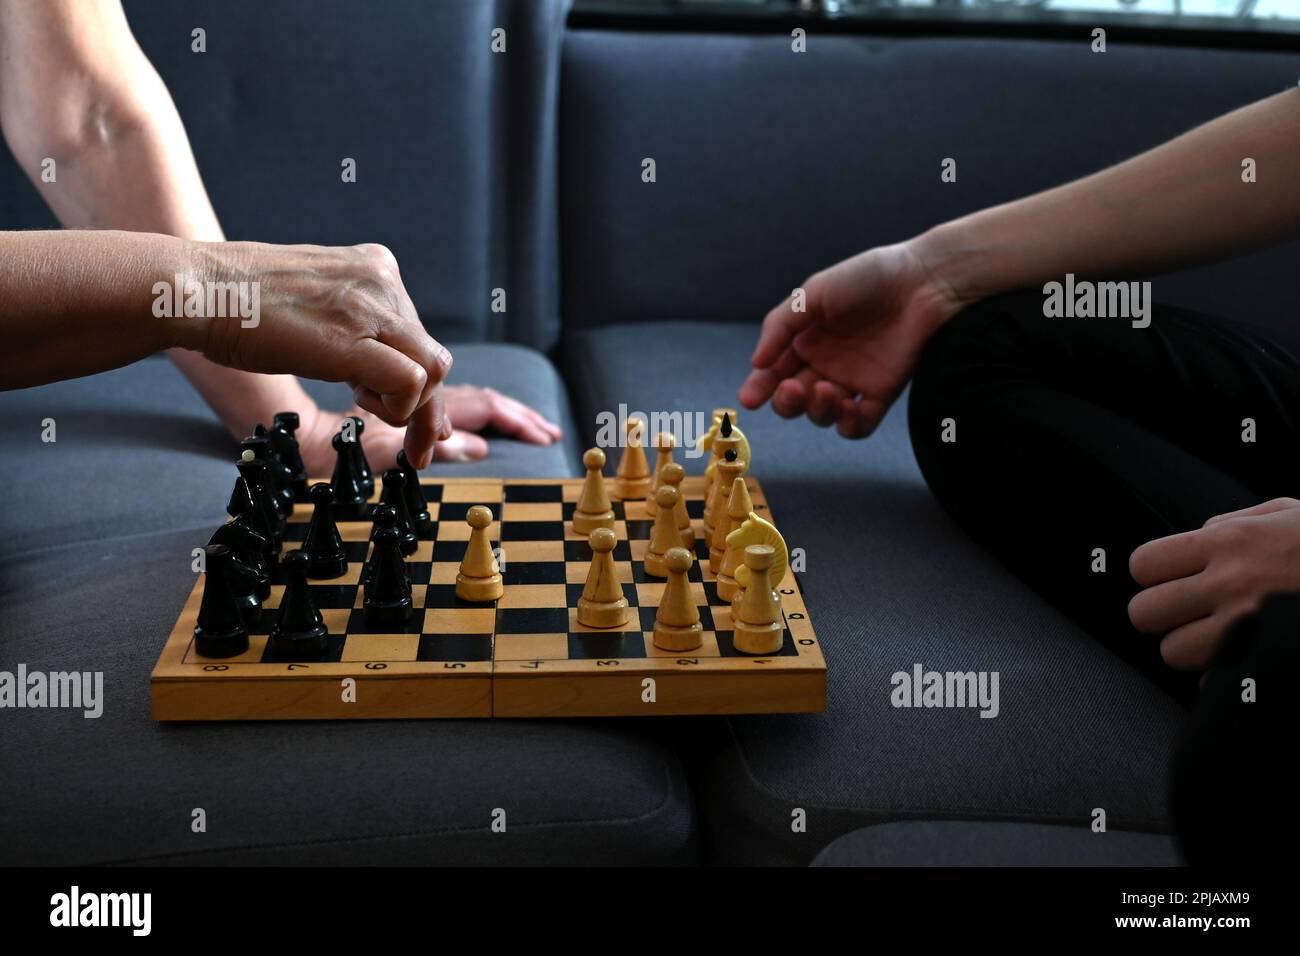 Grandmother playing chess with her granddaughter at home. Strategy and planning concept. Activities for seniors, elderly active lifestyle, older peopl Stock Photo